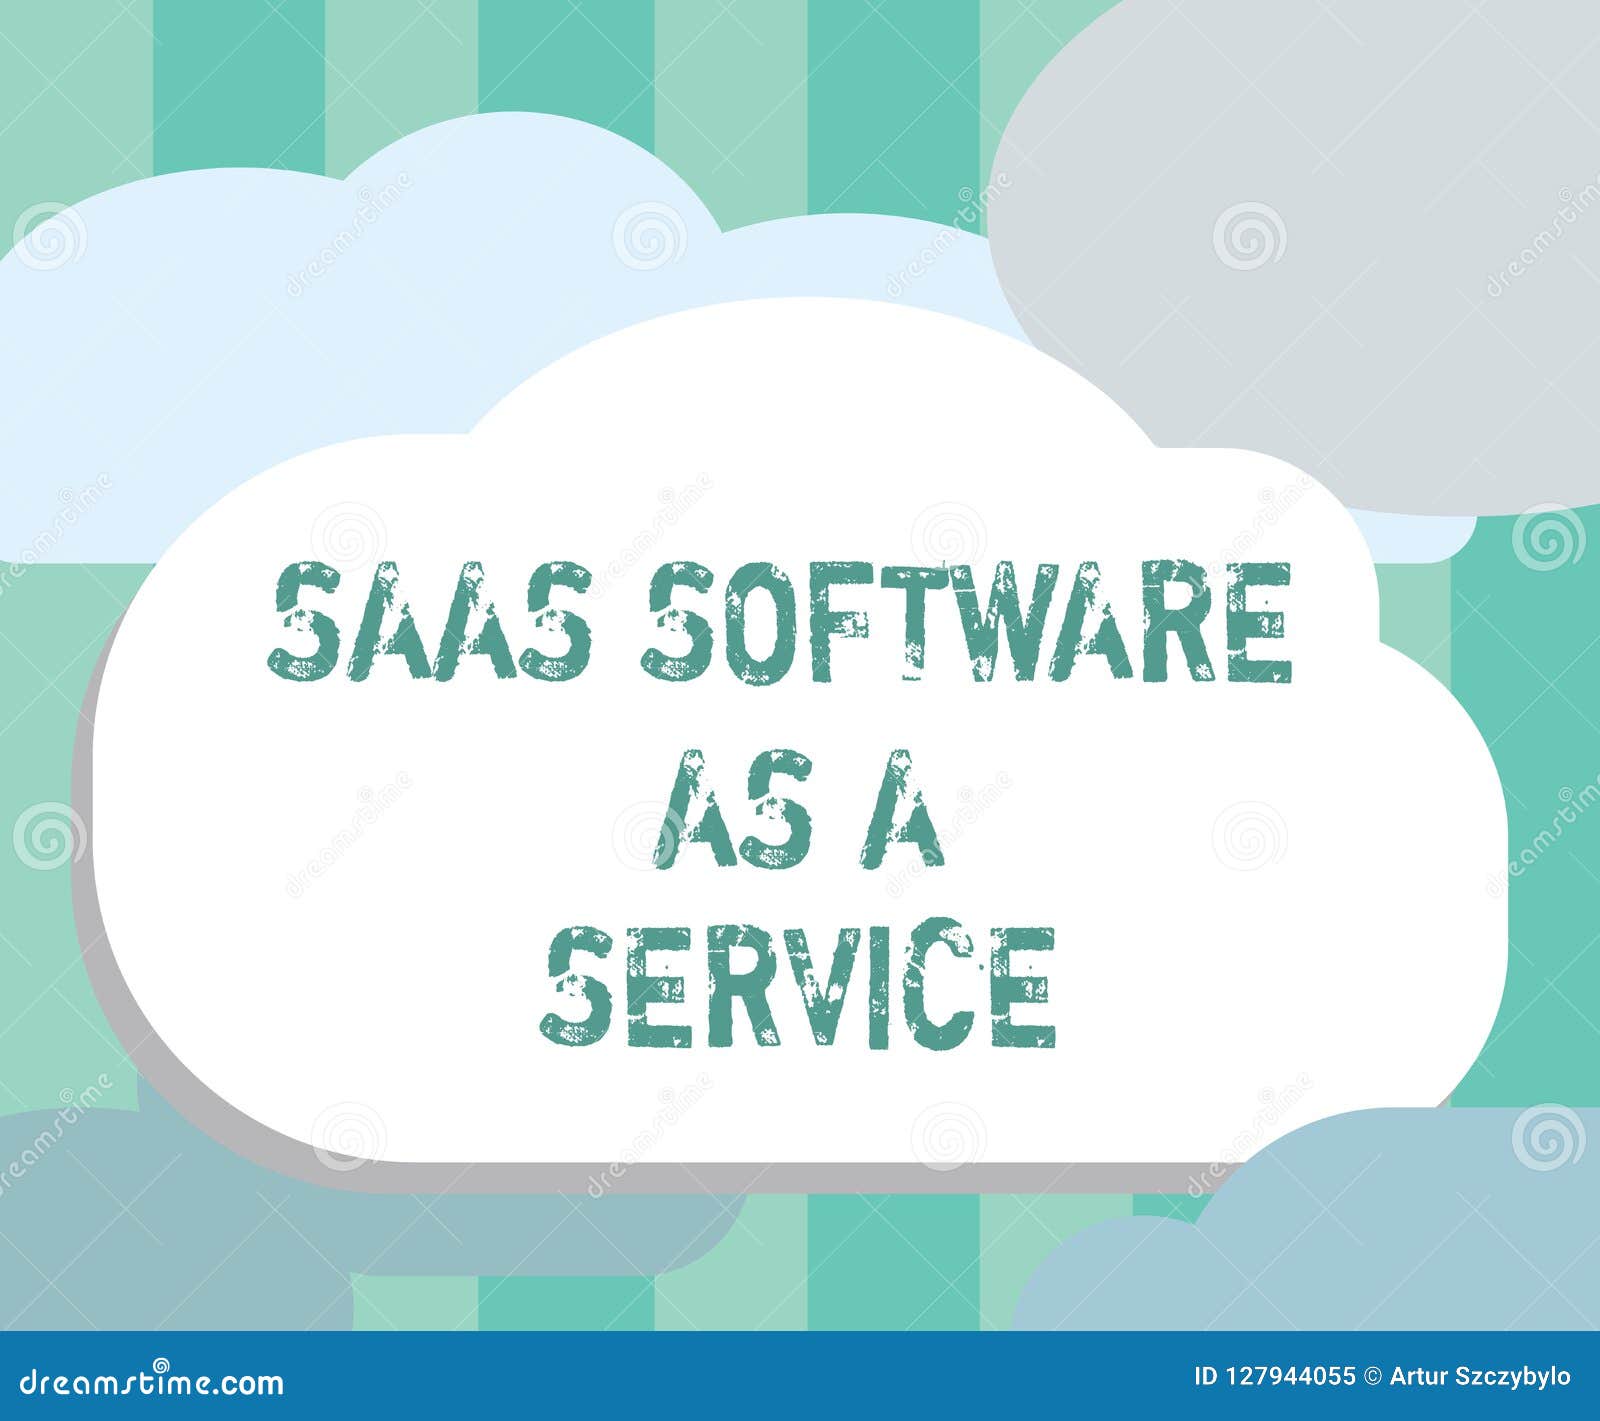 software as a service essay